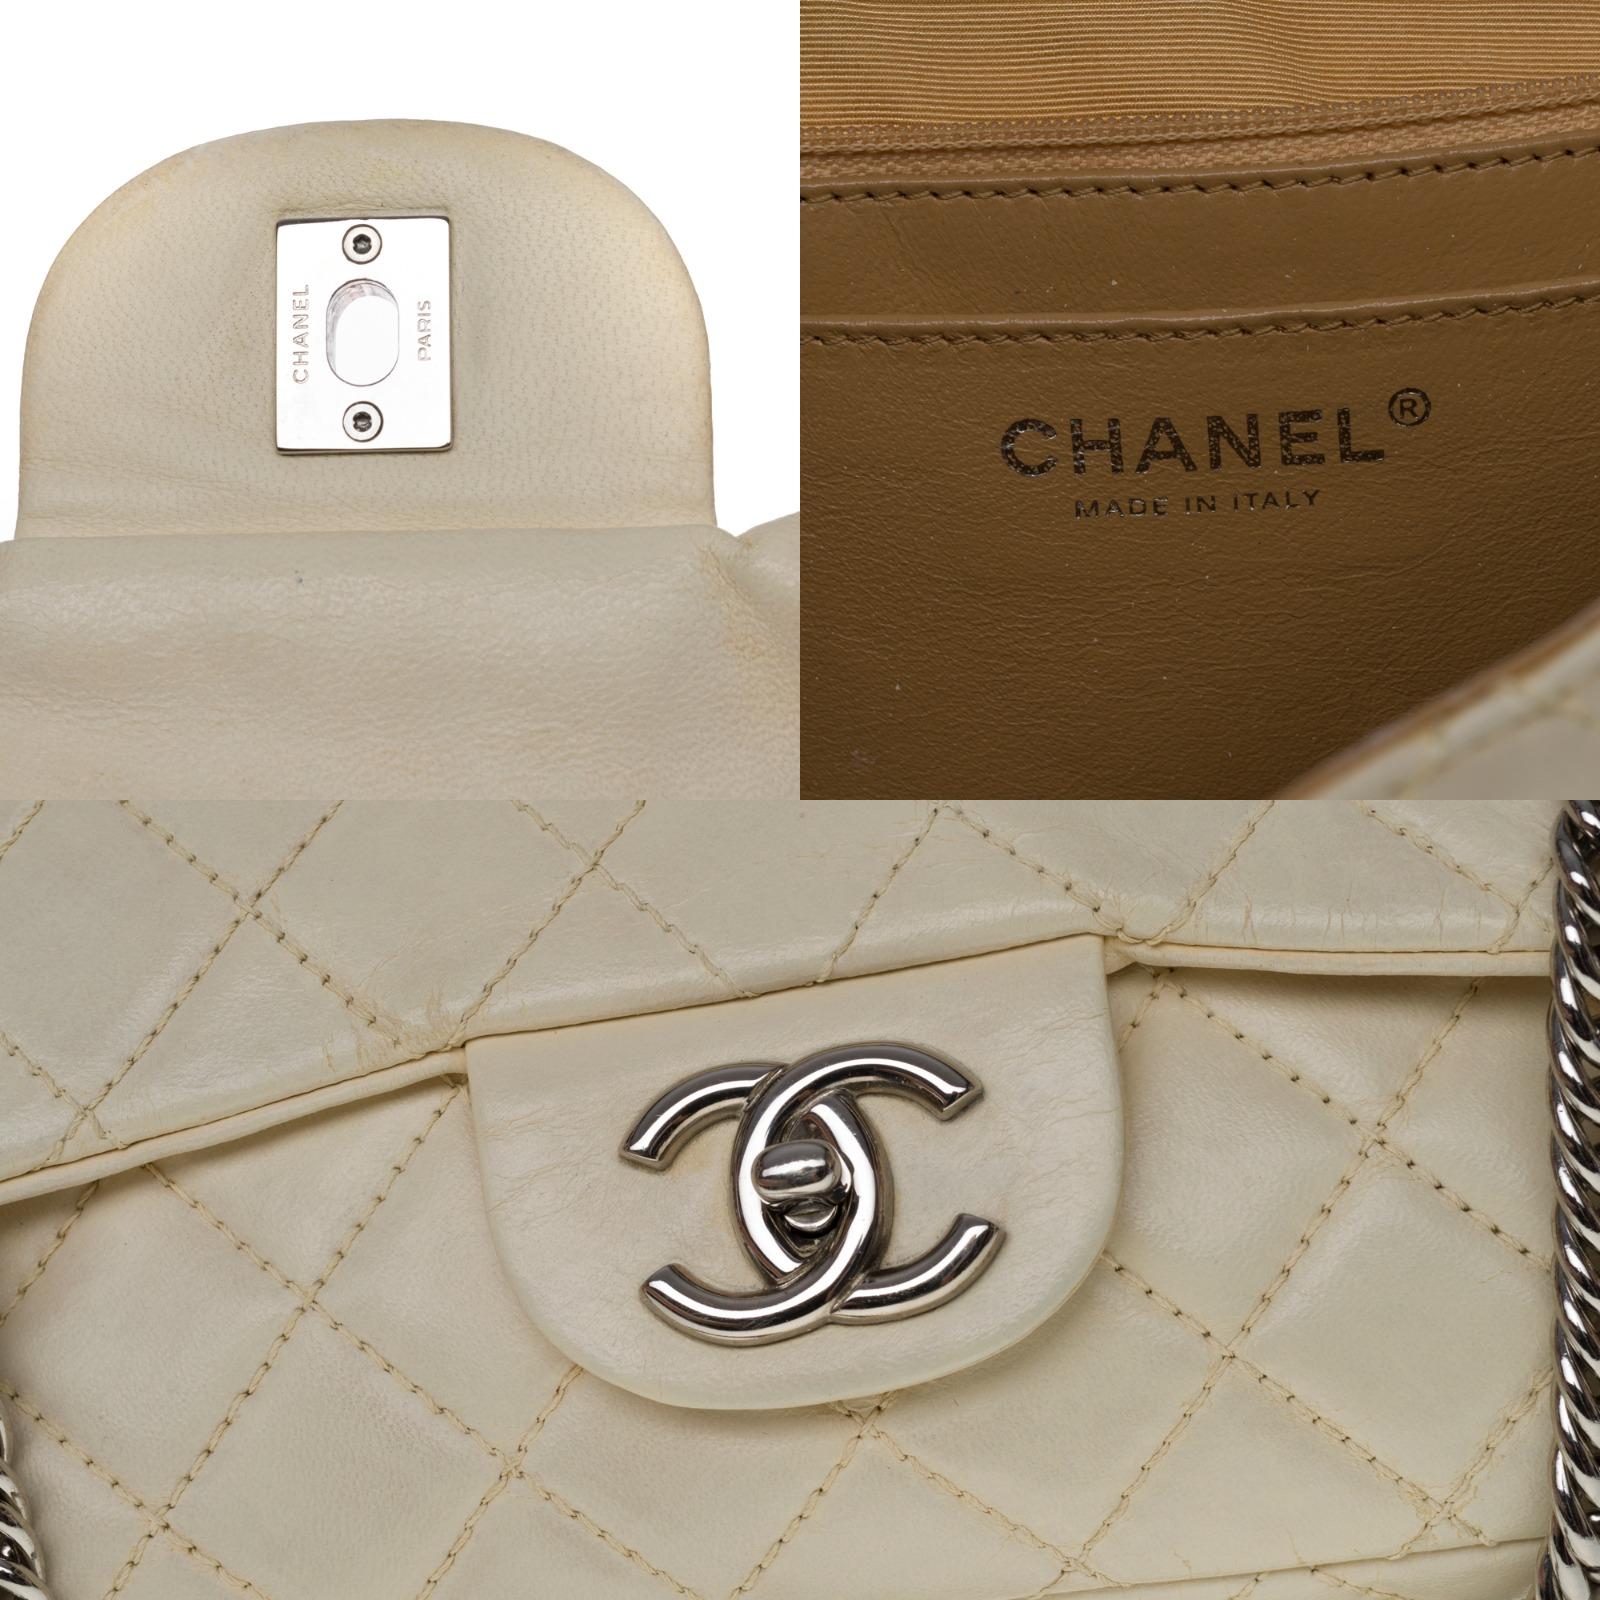 Chanel Timeless/Classique Jumbo Flap bag handbag in ecru quilted lambskin, SHW For Sale 2